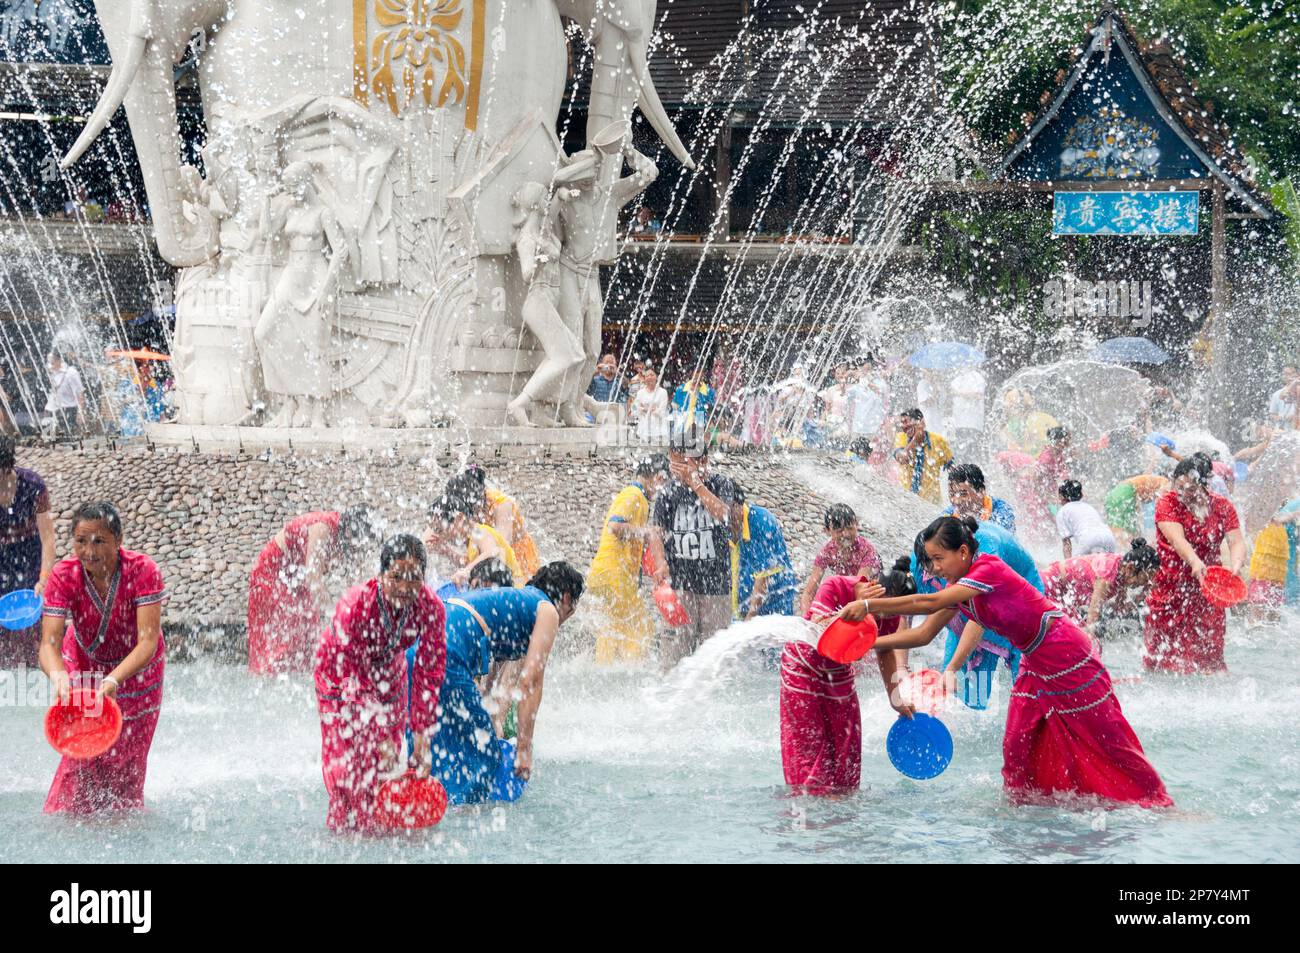 Members of the Dai minority ethnic group celebrate the new years purifying tradition of splashing water on each other at a water park in Yunnan China Stock Photo